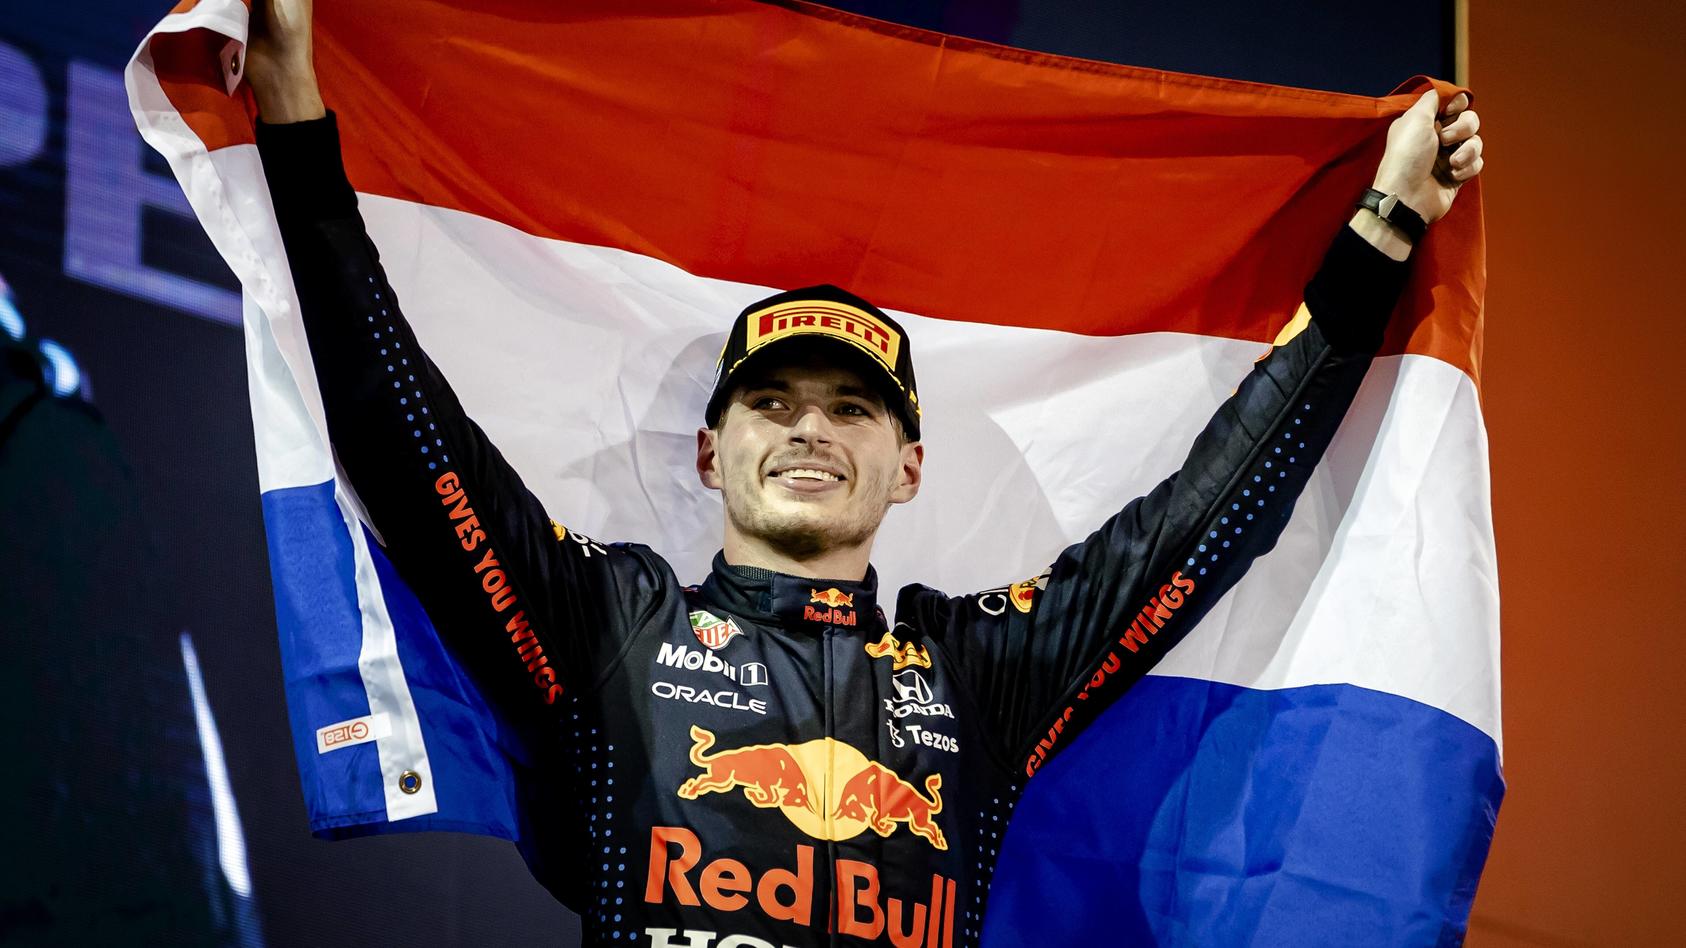  ABU DHABI - Red Bull Racing s Max Verstappen on the podium after winning the Formula 1 World Championship, WM, Weltmeisterschaft after the Abu Dhabi Grand Prix at Yas Marina Circuit on December 12, 2021 in Abu Dhabi, United Arab Emirates. REMKO DE W